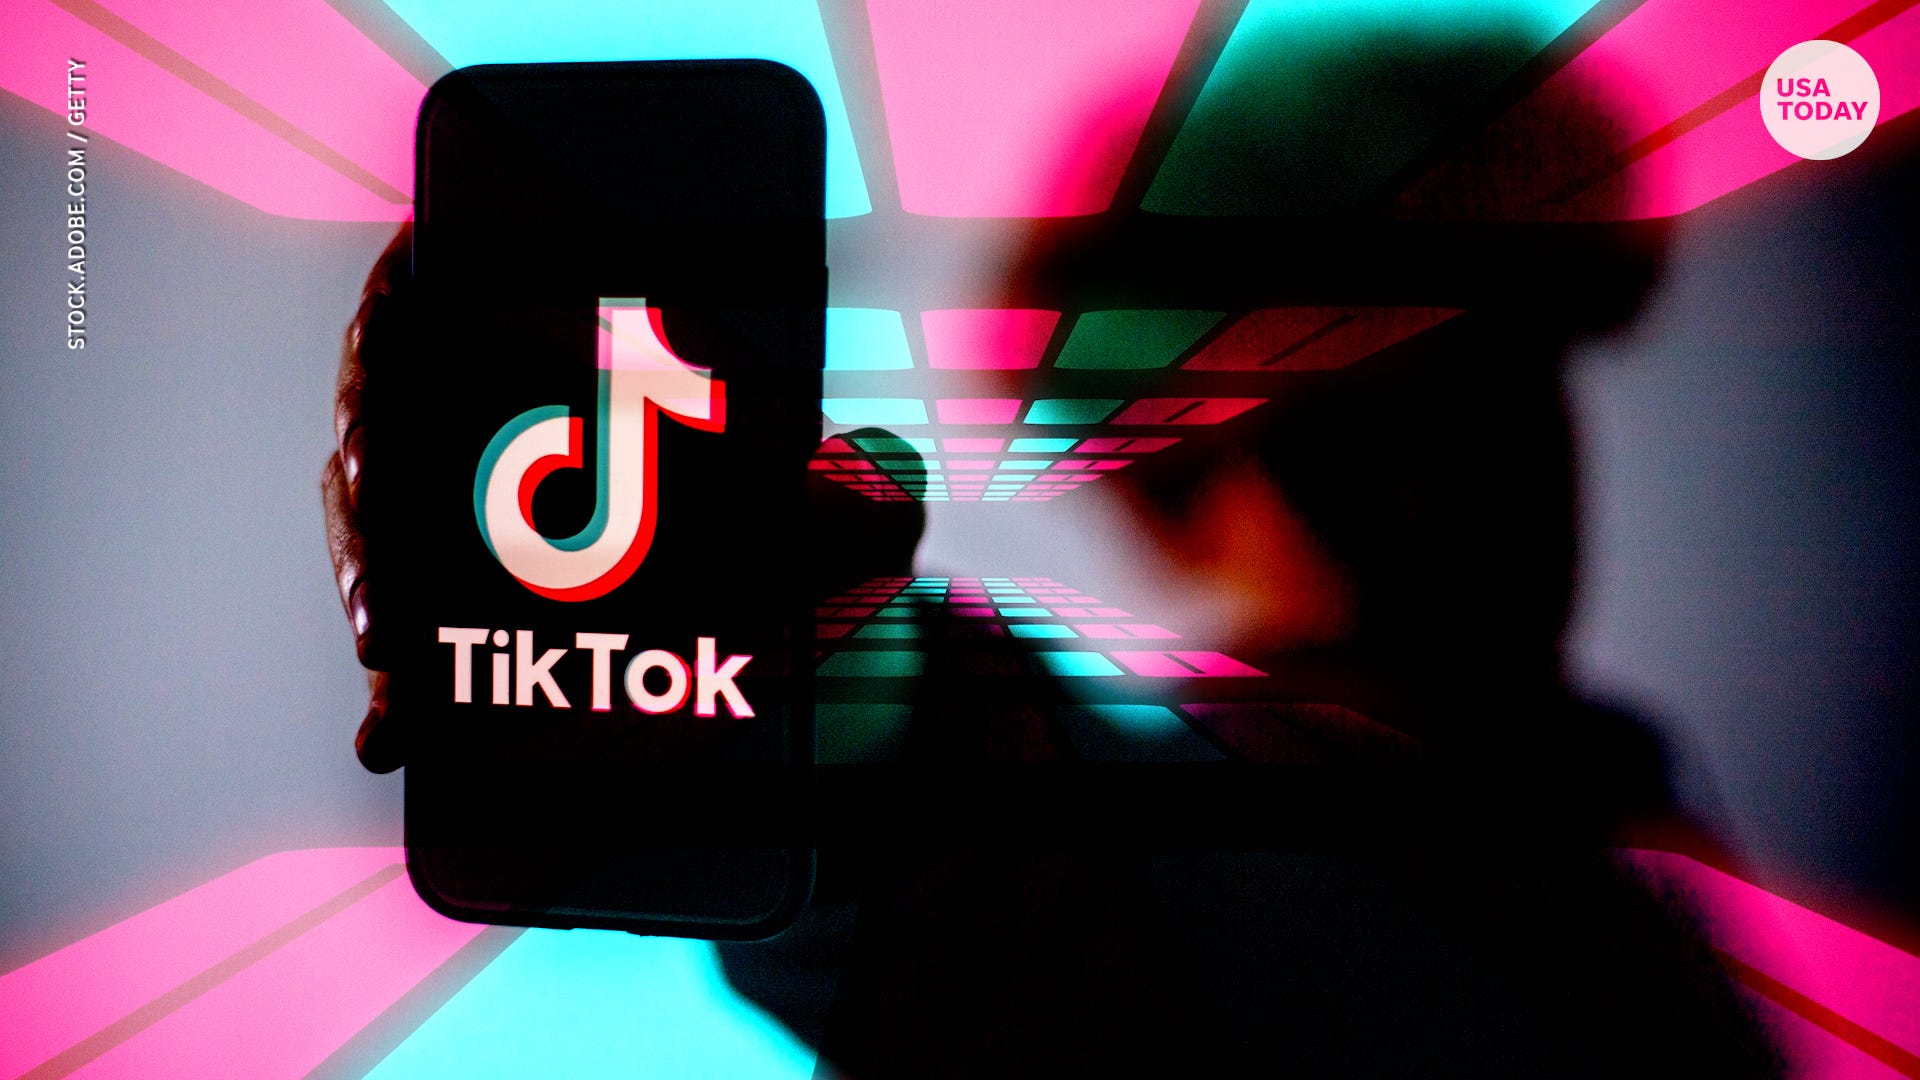 TikTok, Shopify partner to allow users to shop directly within app